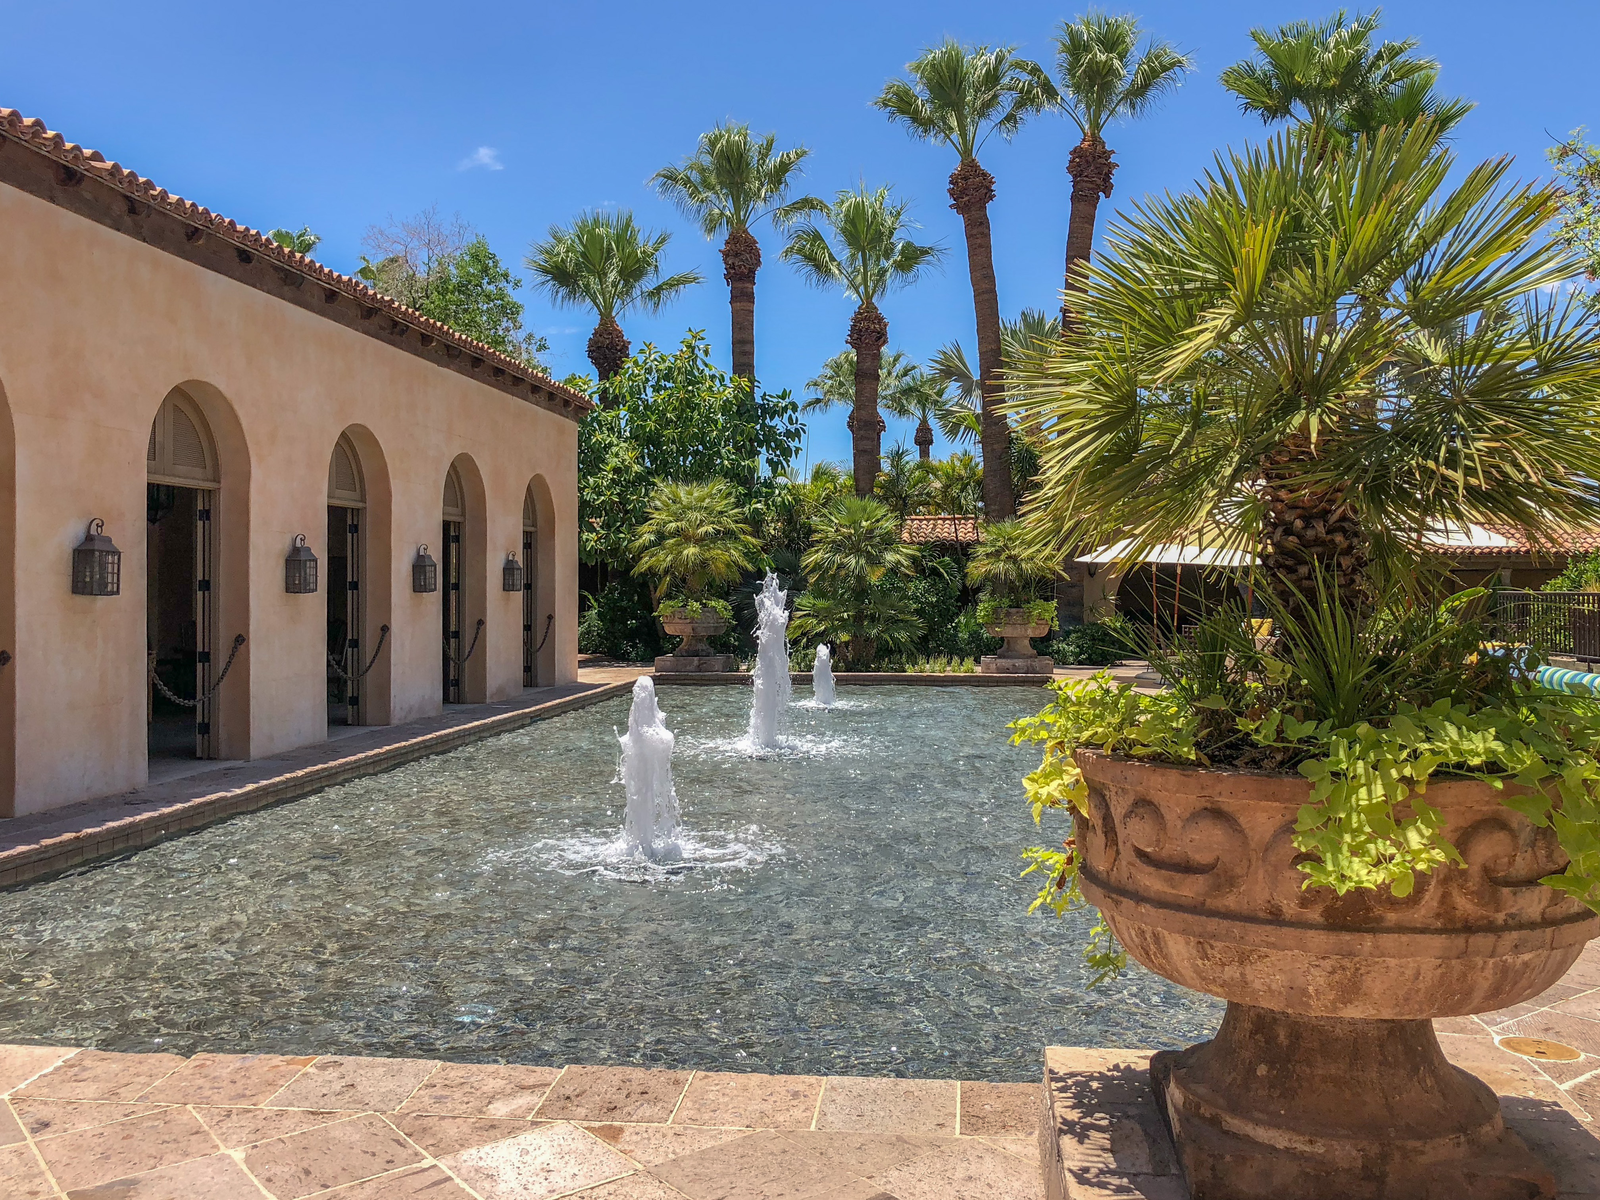 Three fountain heads spouting water by the pool and small palm trees planted in an antique pot at Royal Palms Resort & Spa, one of the best all-inclusive resorts in the U.S.